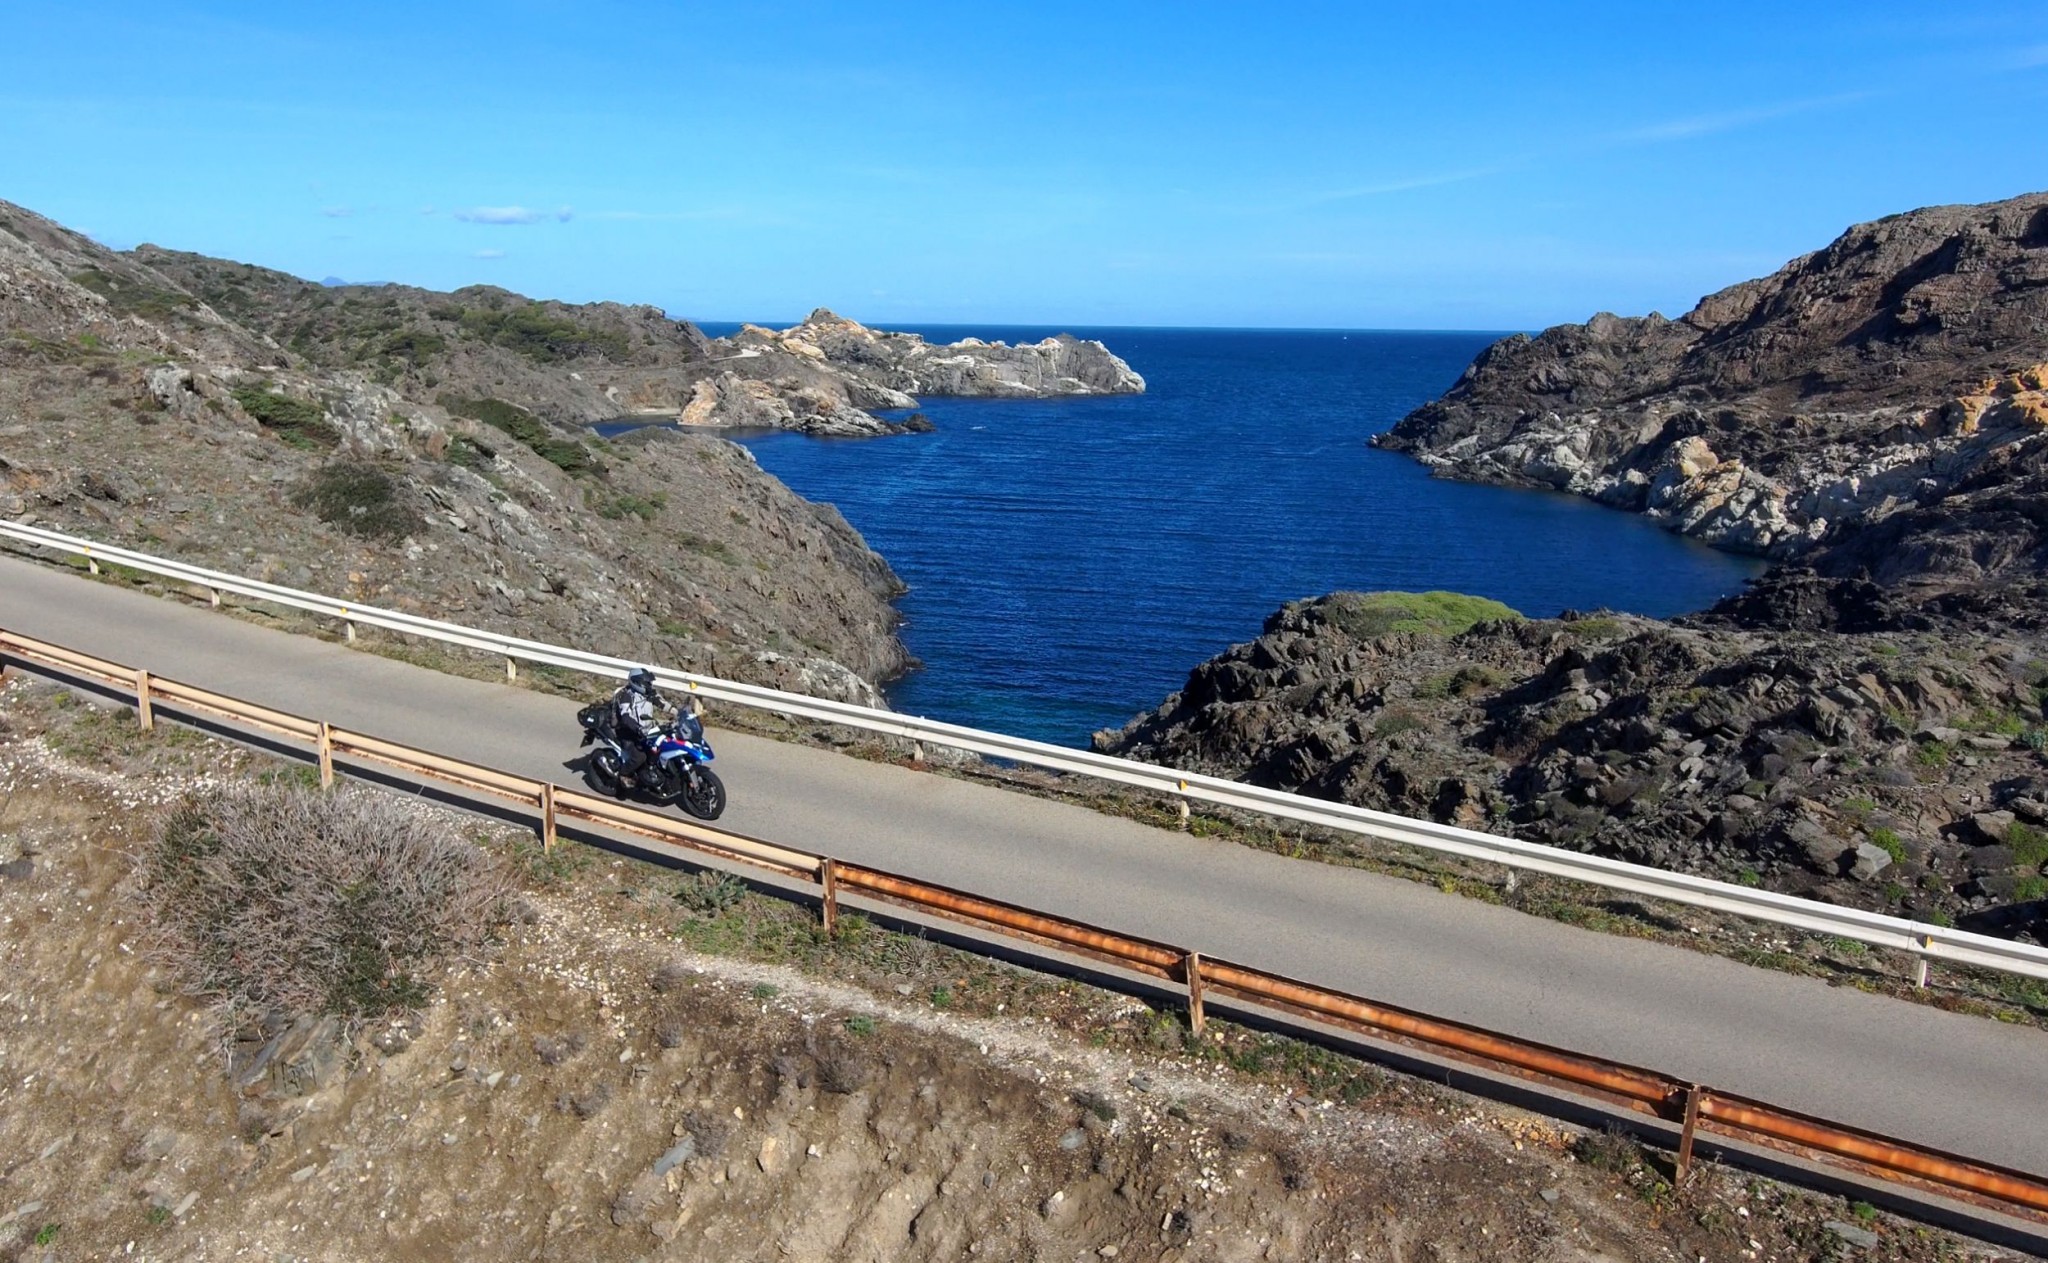 BMW R 1300 GS road test - from Barcelona to Vienna - Image 14